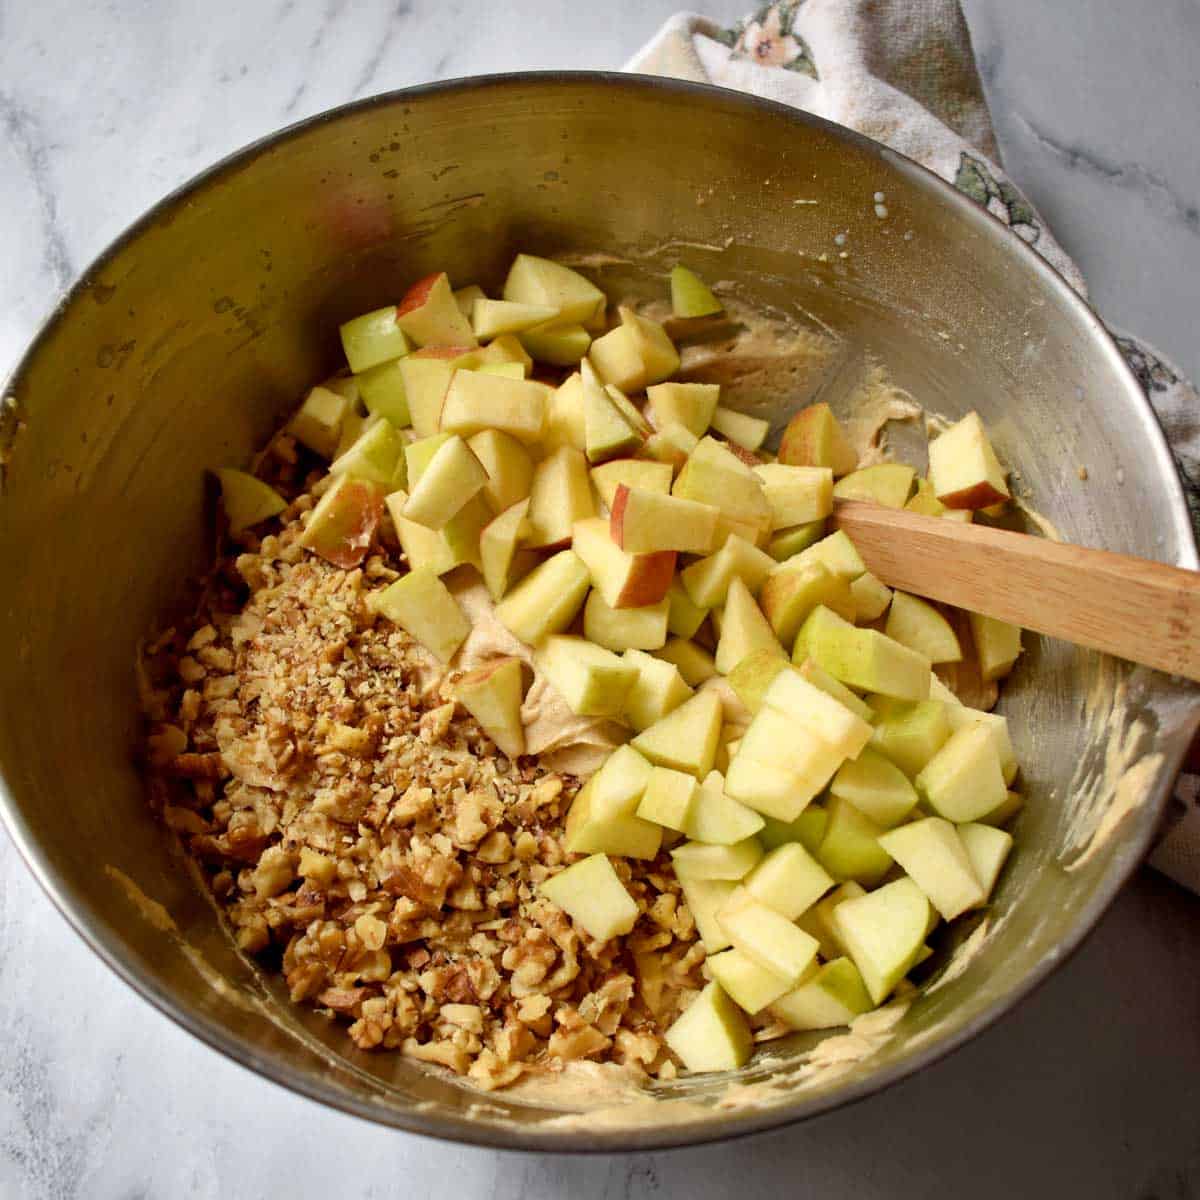 Chopped apples and walnuts being added to apple crumb cake batter.